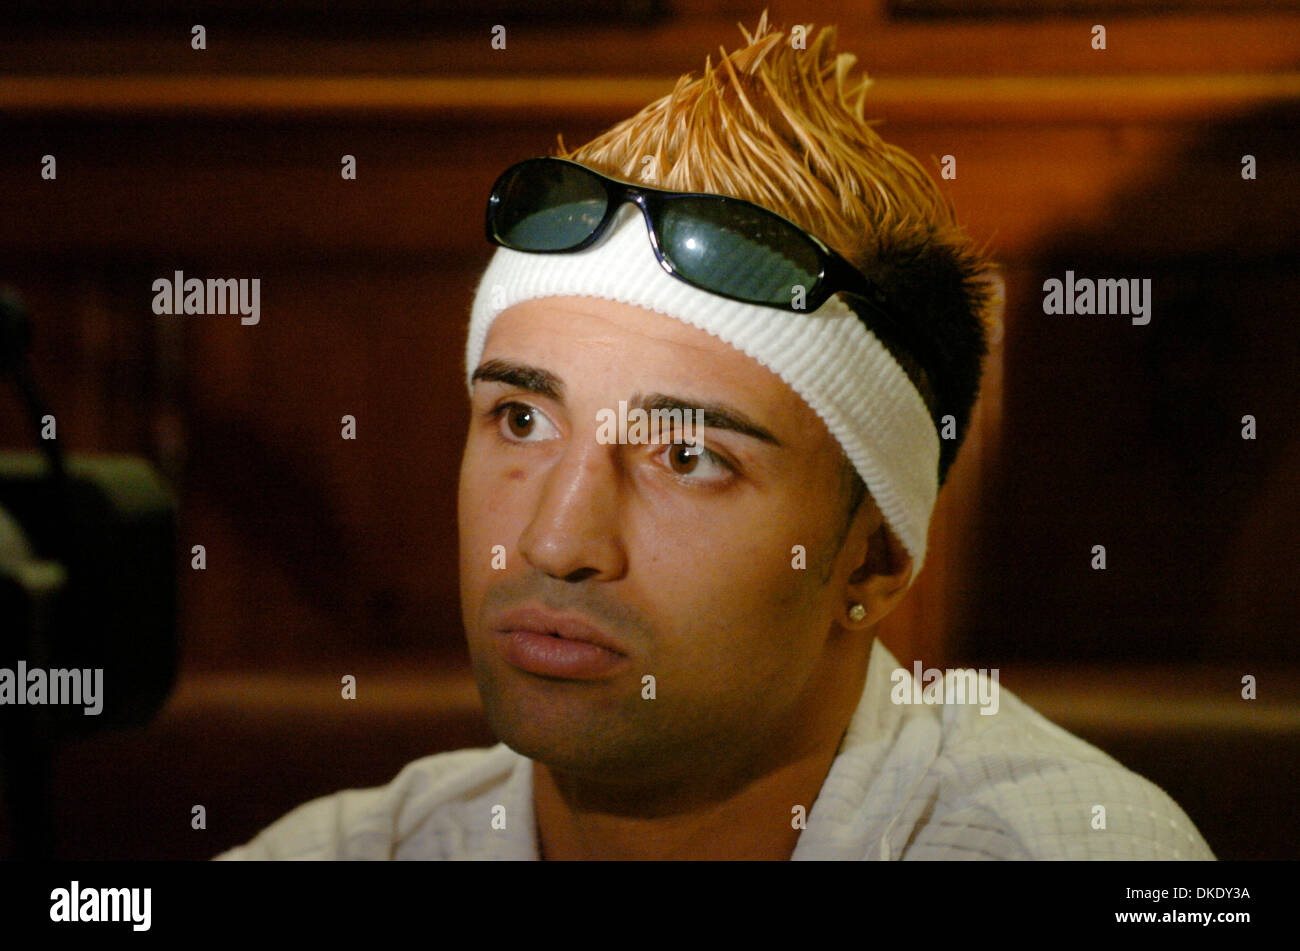 Jun 13, 2007 - Manhattan, NY, USA - Challenger PAULIE MALIGNAGGI speaks to the press. Gallagher's Steakhouse hosts a press conference promoting the IBF Junior Welterweight Championship bout as Paulie Maliginaggi, of Bensonhurst Brooklyn challenges veteran world titlist Lovemore N'dou this Saturday night, June 16 at Mohegan Sun Arena in Connecticut, the bout will be televised on HBO Stock Photo